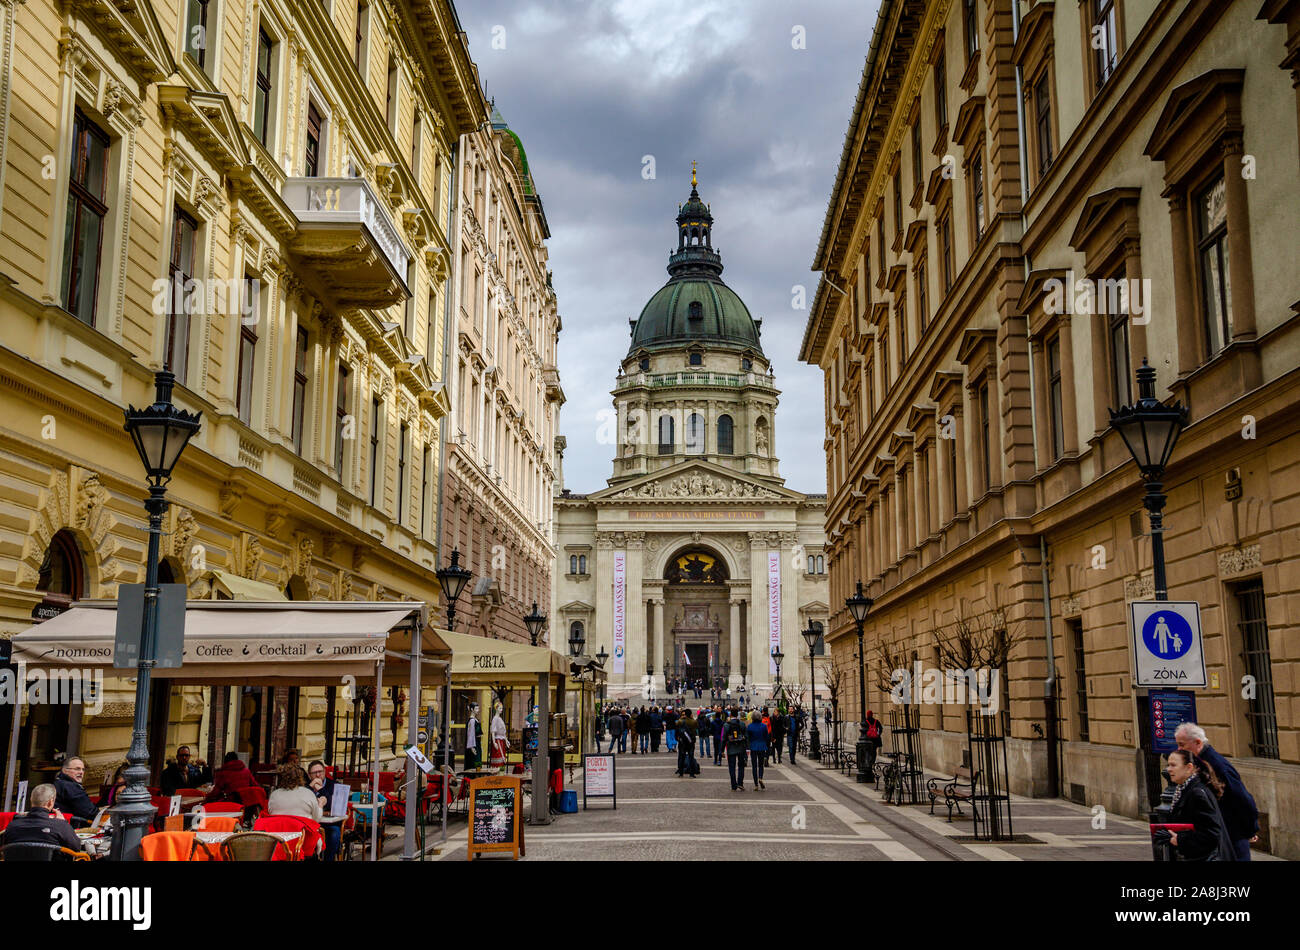 People walking at Zrinyi Street, one of the famous streets in Budapest, St. Stephen's Basilica can be seen at the background. Stock Photo